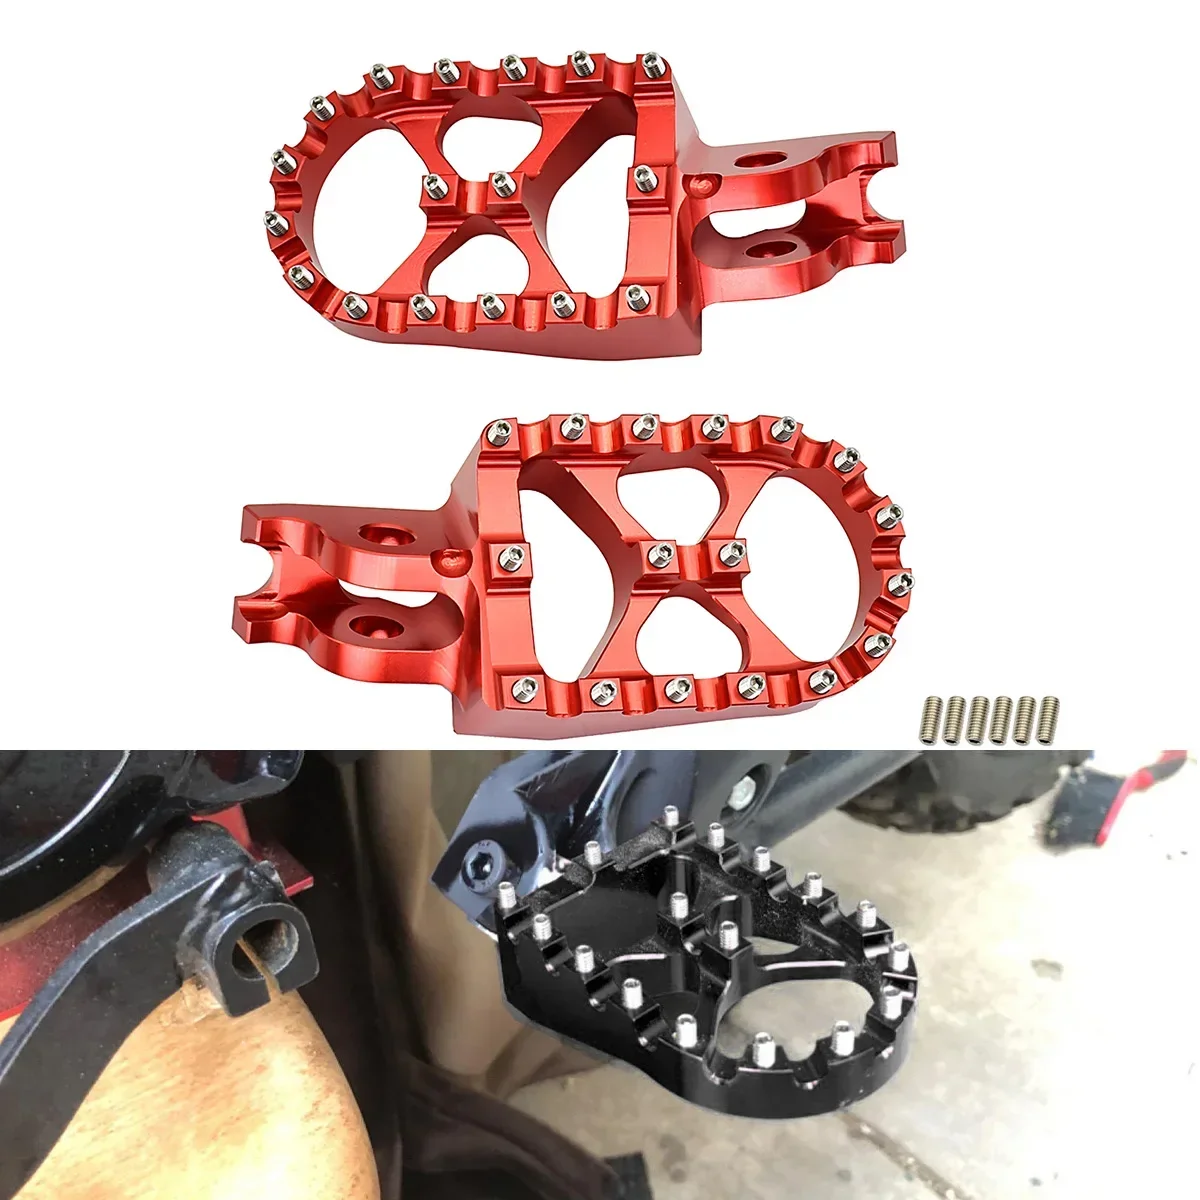 Otorcycle cnc foot pegs rests pedals footpegs for honda cr crf 125r 150r 250r 250x 450r thumb200